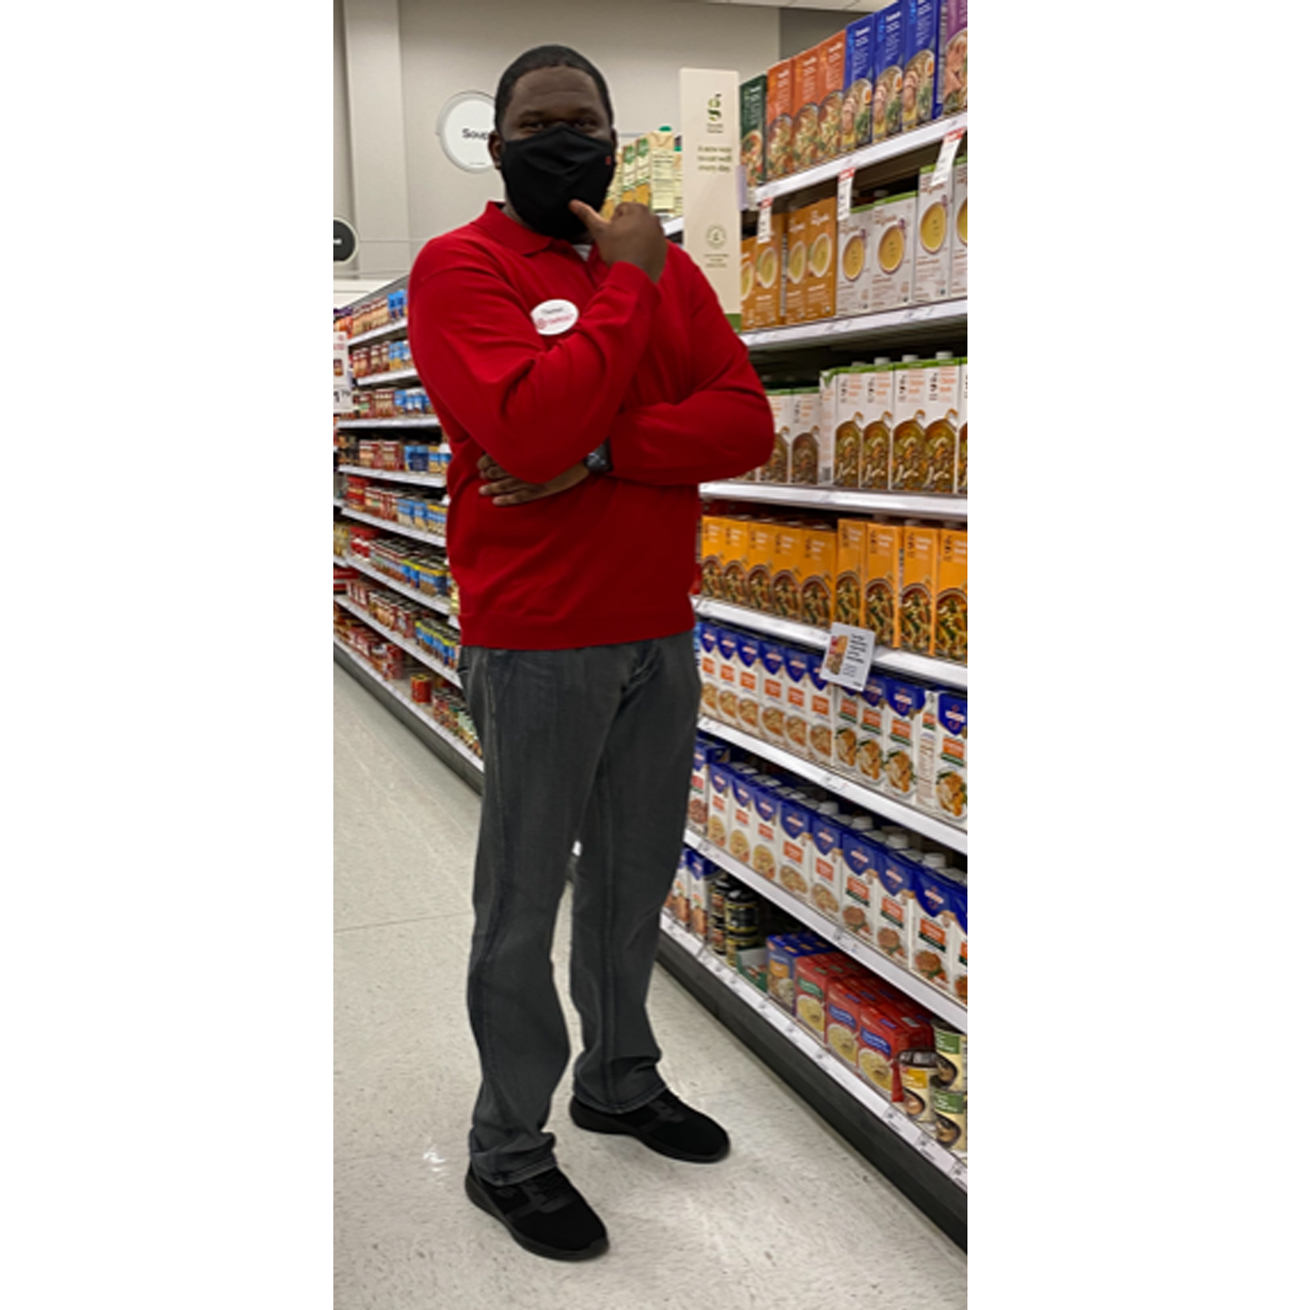 Thomas, wearing a red shirt, name tag and face mask, stands near shelves of soups and canned goods